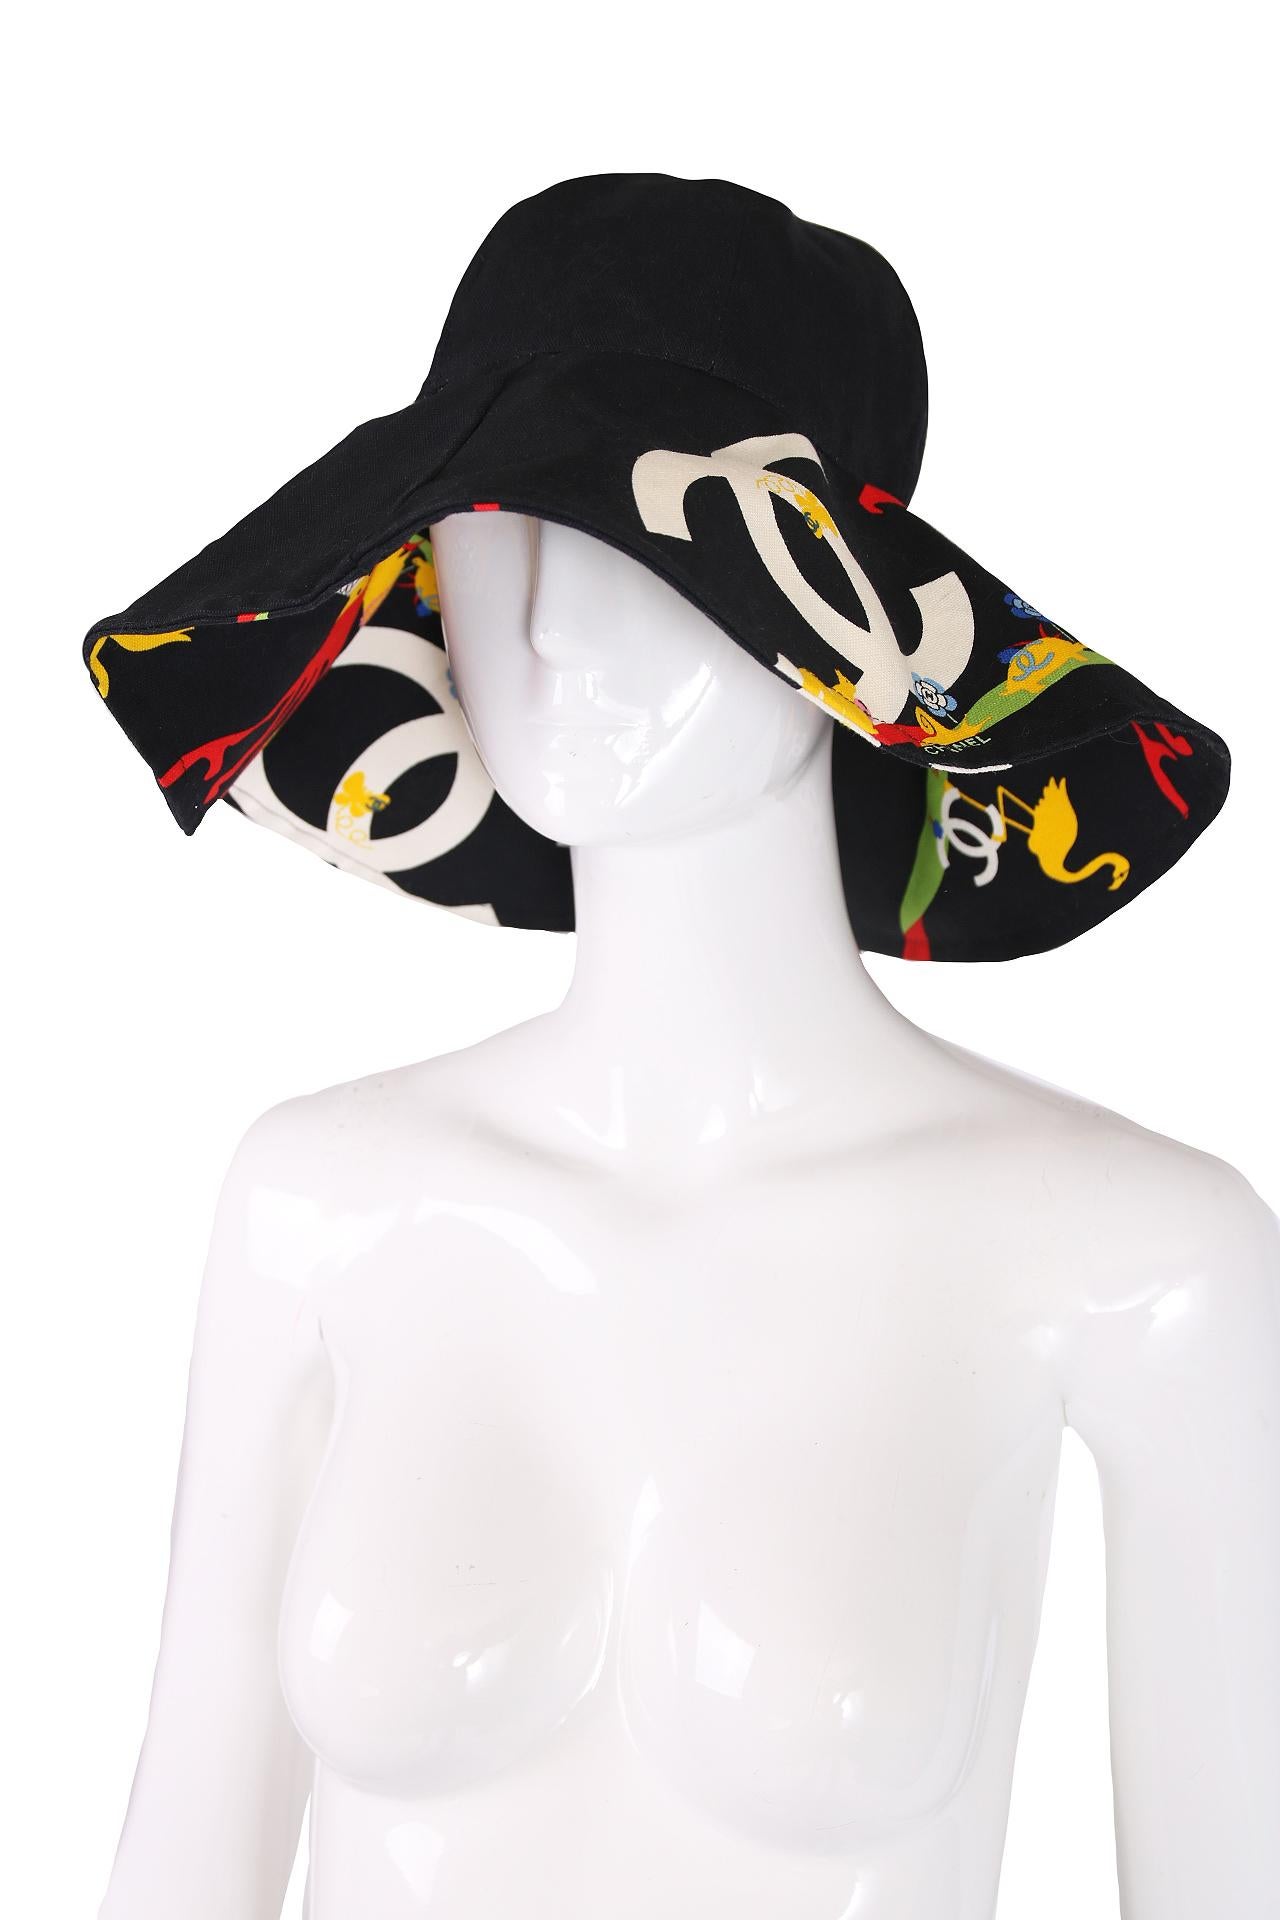 2007 Chanel cotton canvas navy blue floppy wide-brimmed hat with a print featuring a variety of adorable animals wearing the CC logo, flowers with a CC logo center, an owl seated in a red tree and an oversized white CC logo motif in the background.